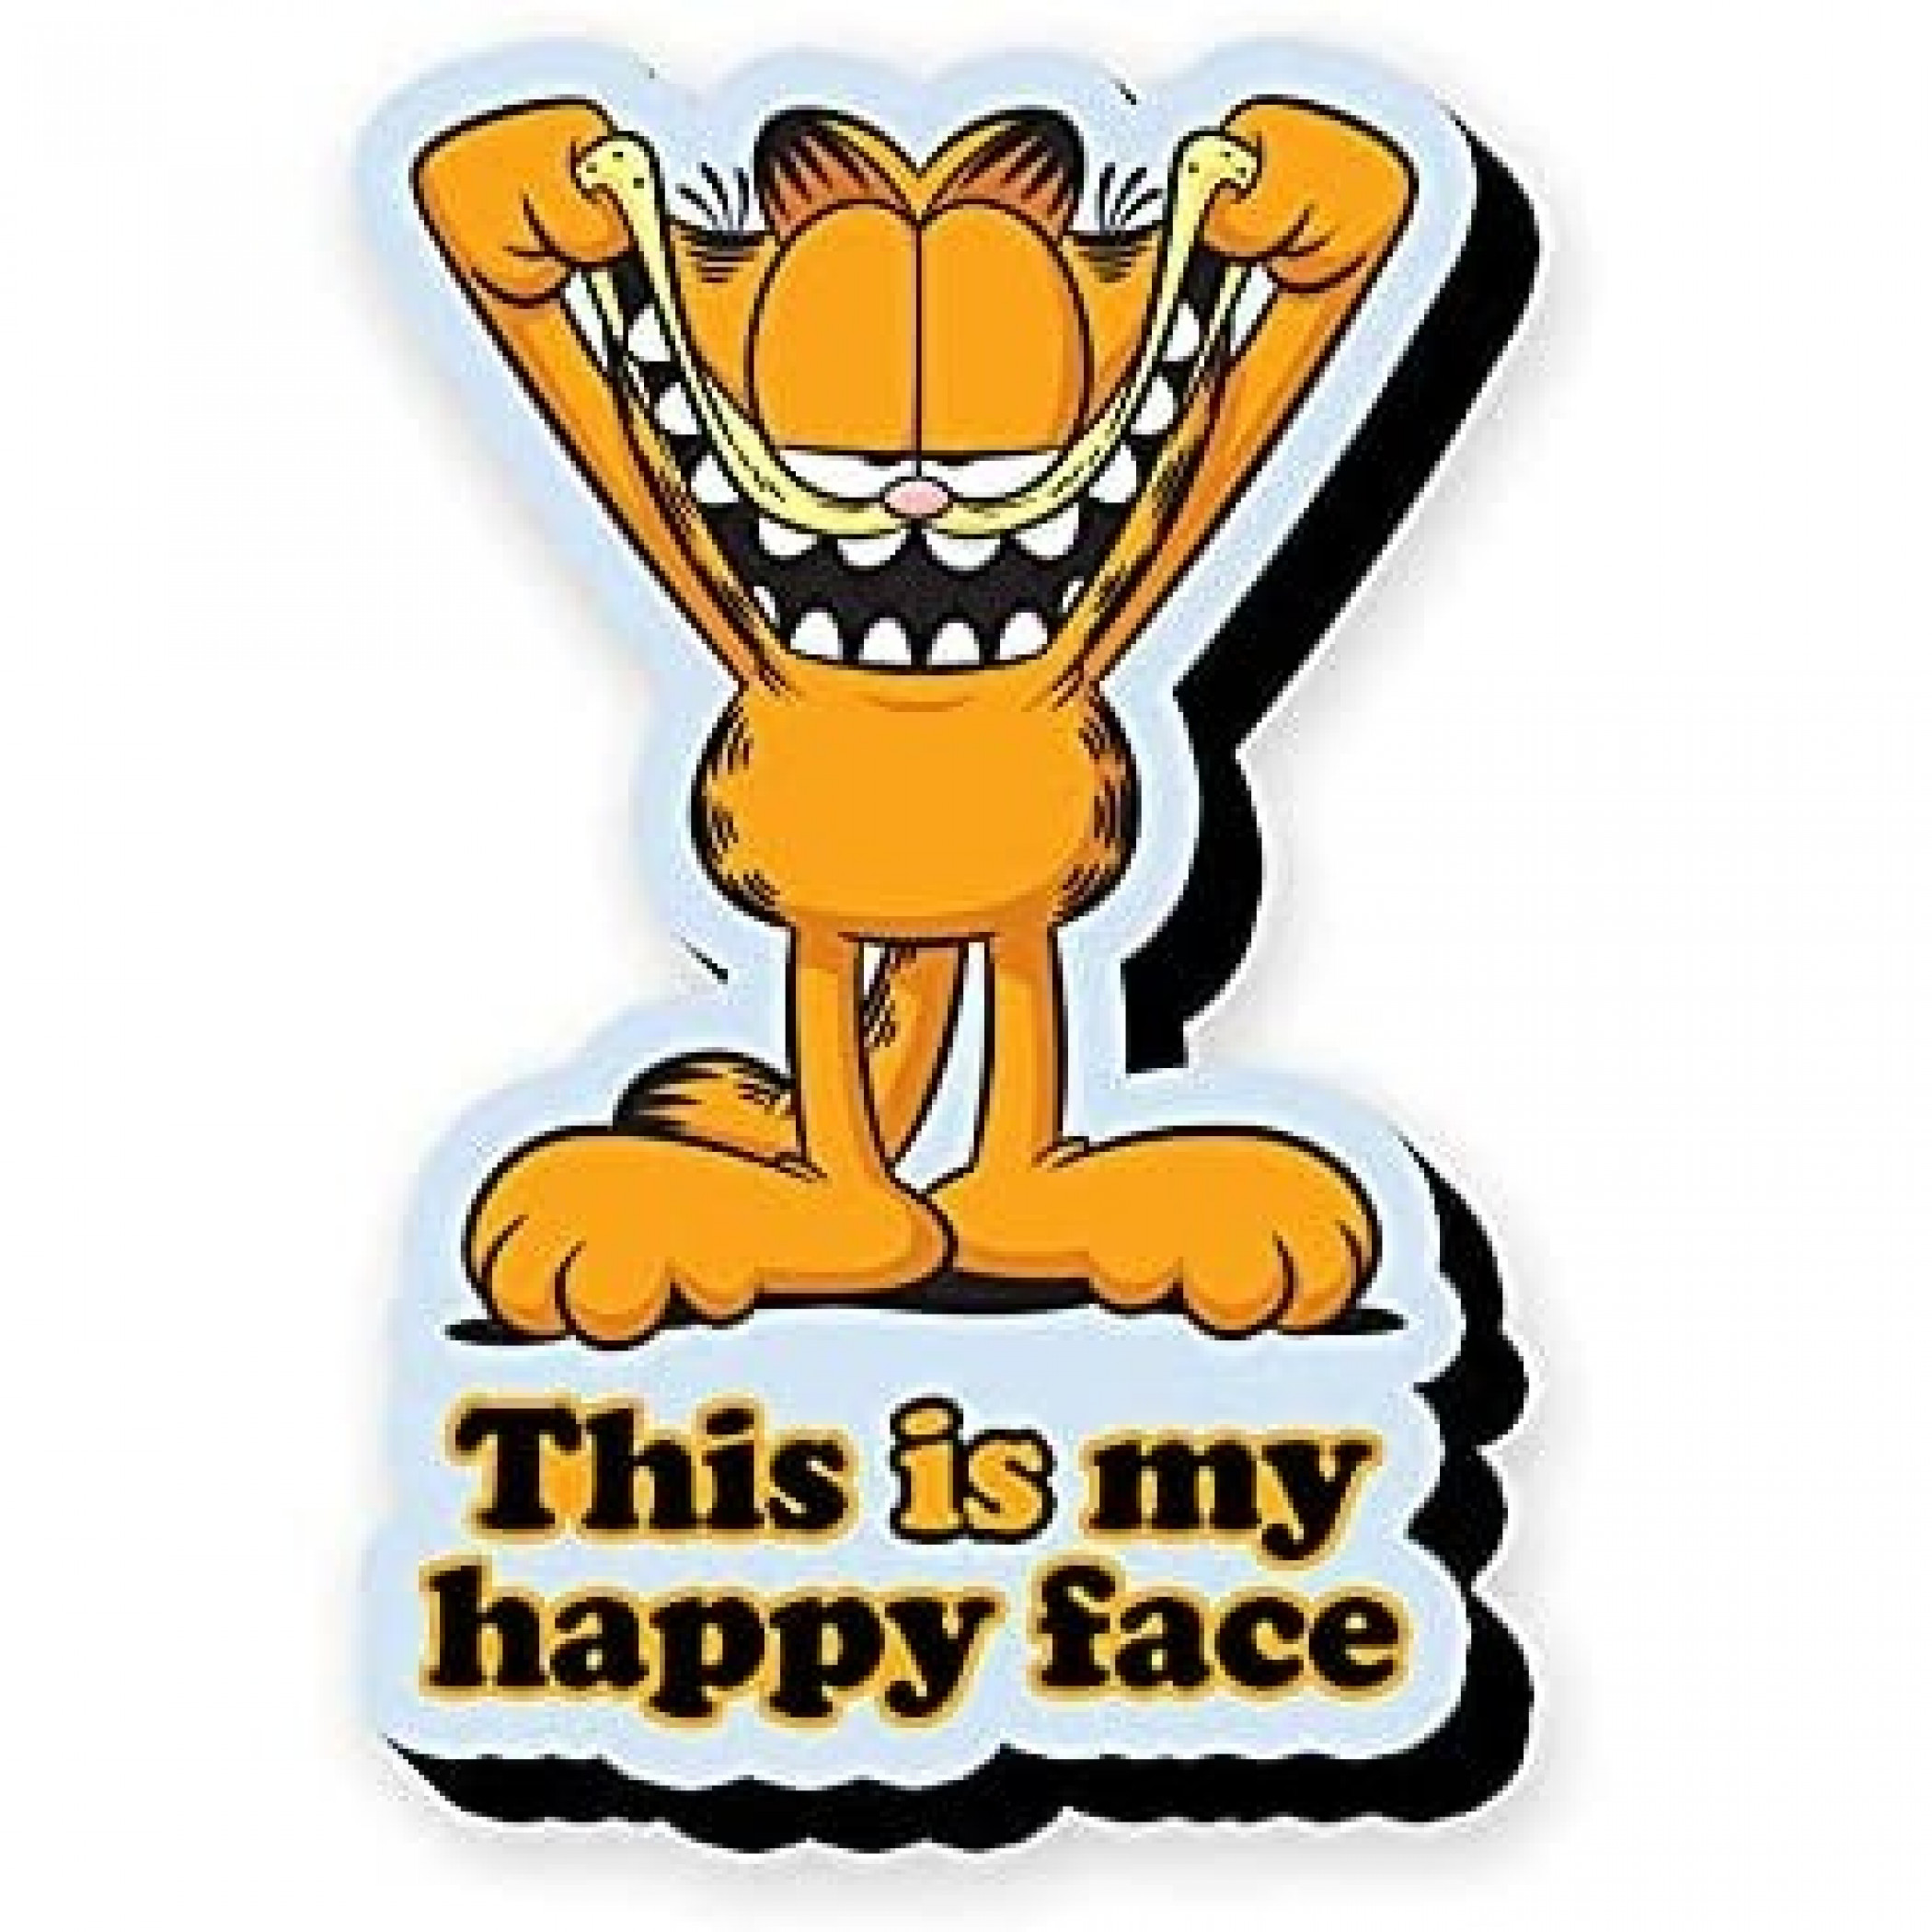 Garfield The Cat Cartoon This Is My Happy Face Magnet